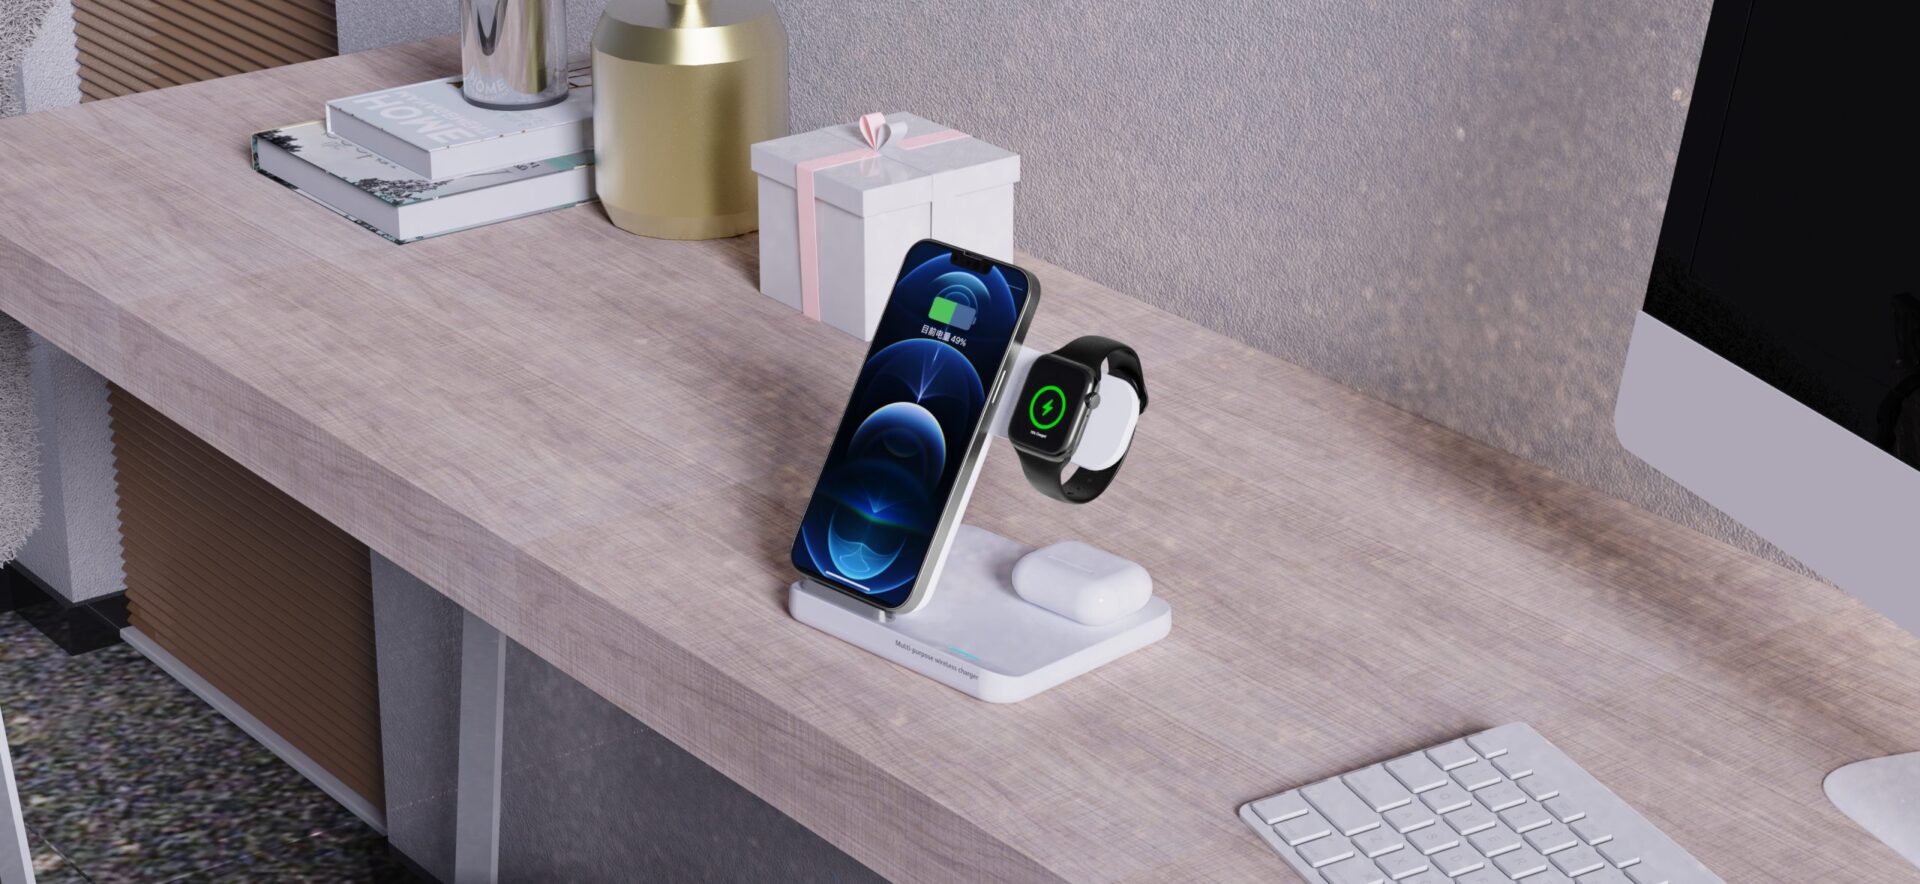 3 in 1 Foldable Wireless Charger for Apple Devices